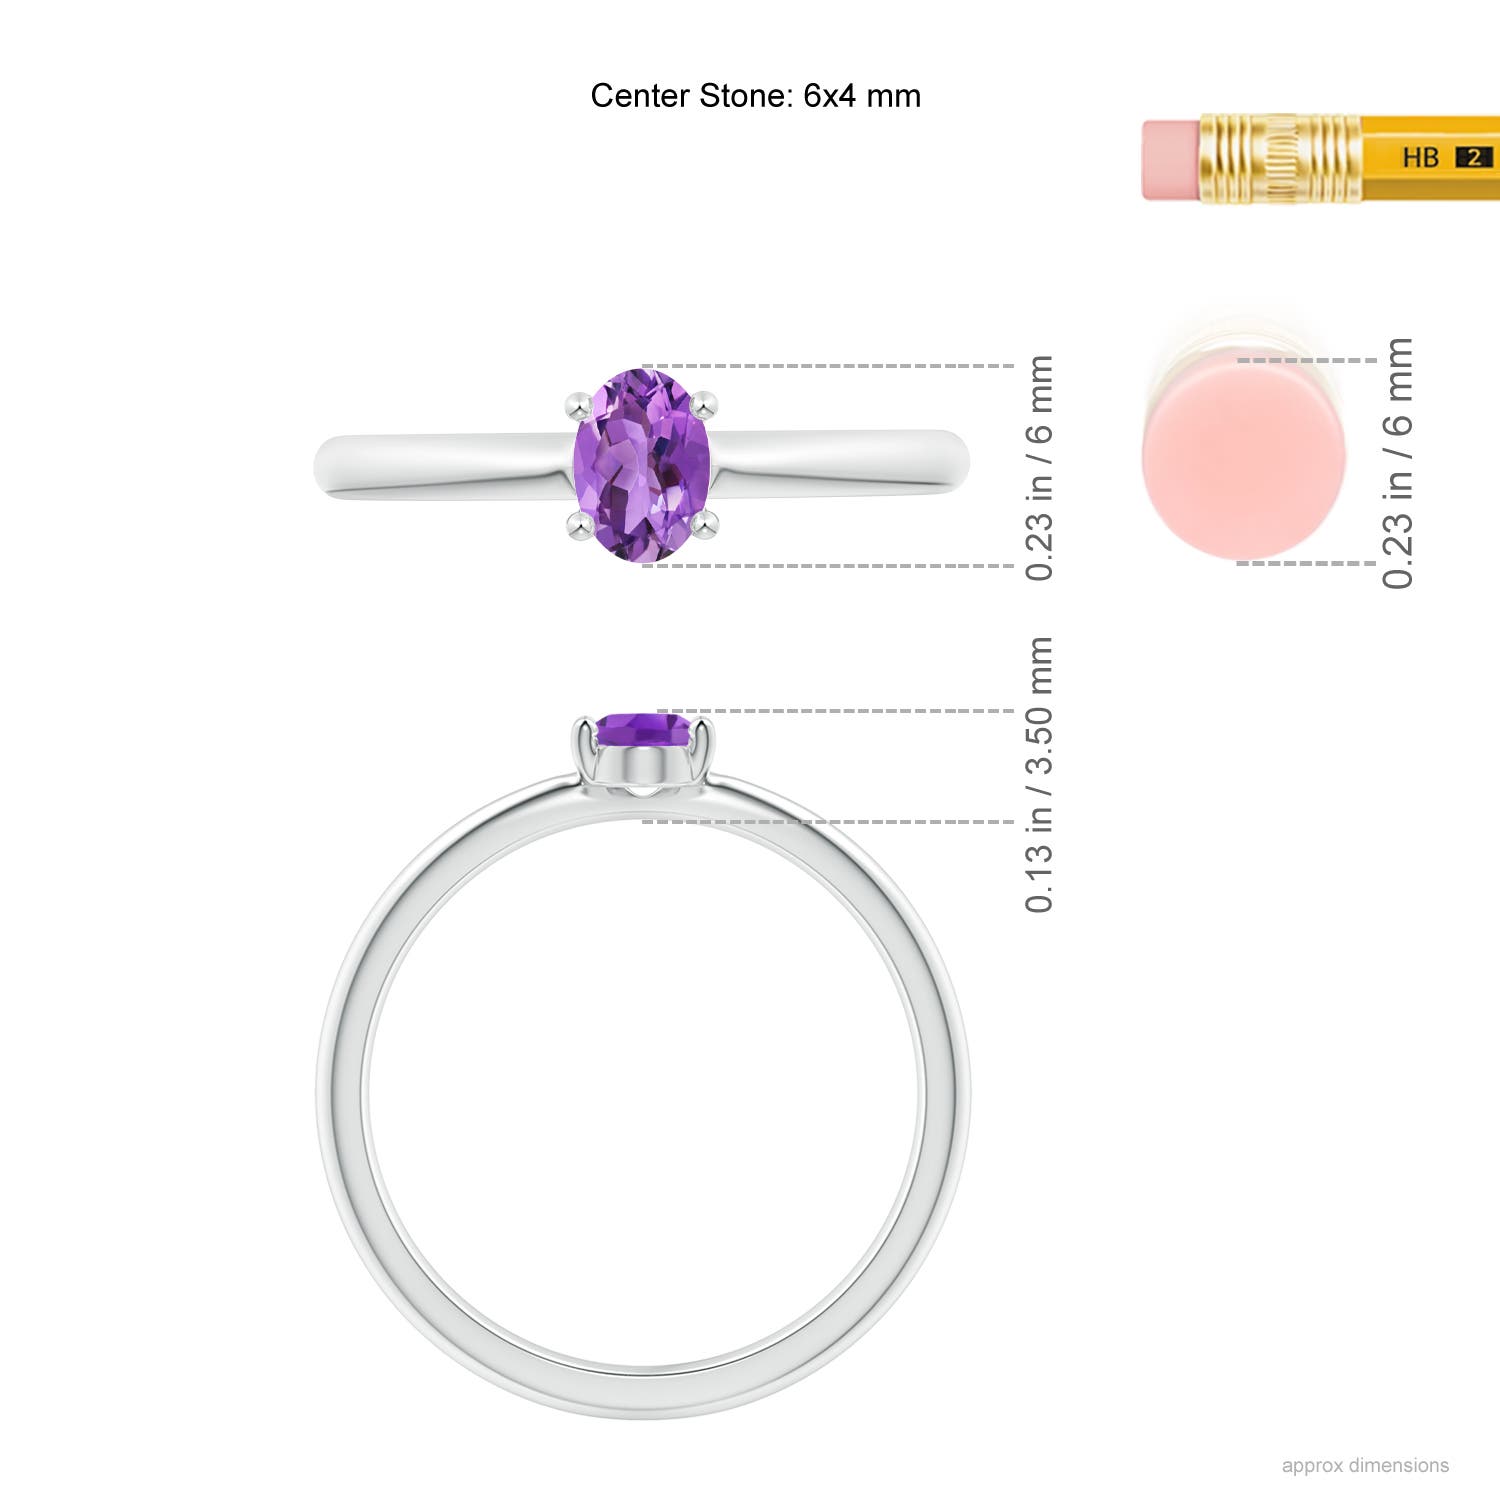 AA - Amethyst / 0.4 CT / 14 KT White Gold